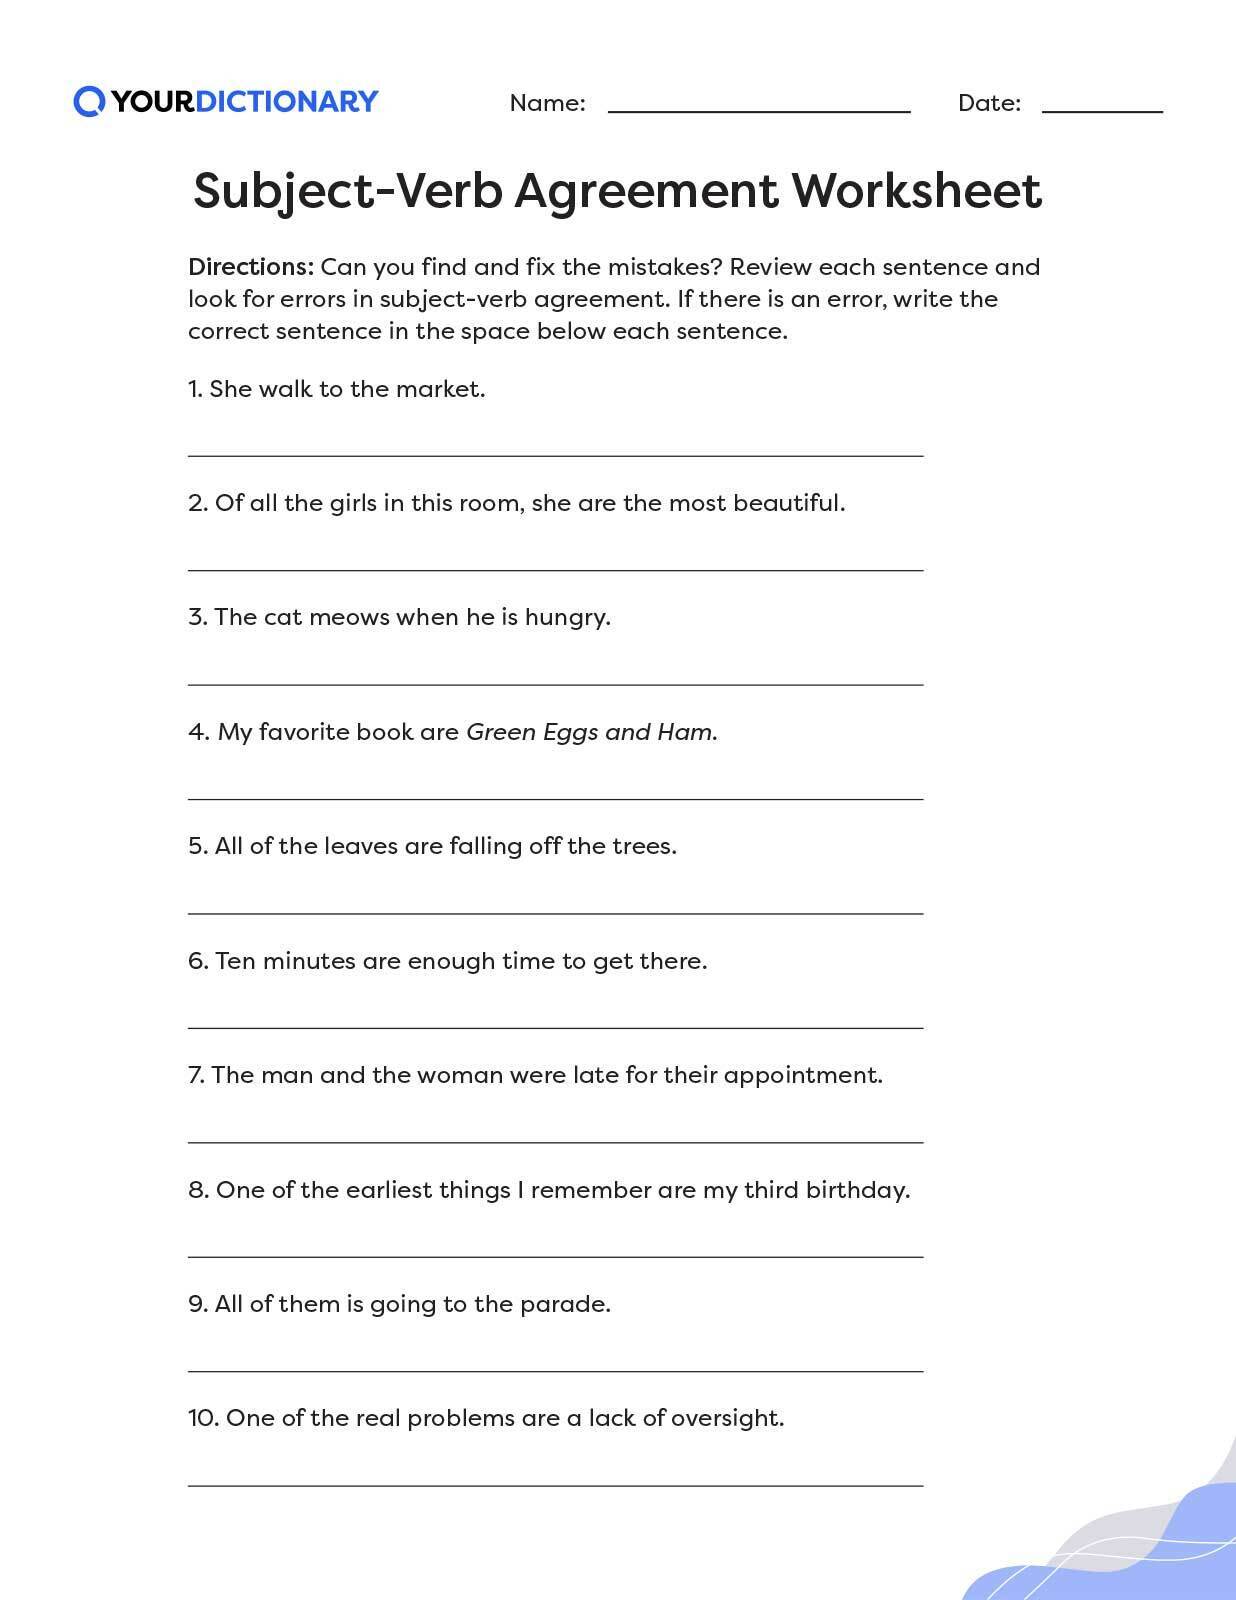 difficult subject-verb agreement worksheet